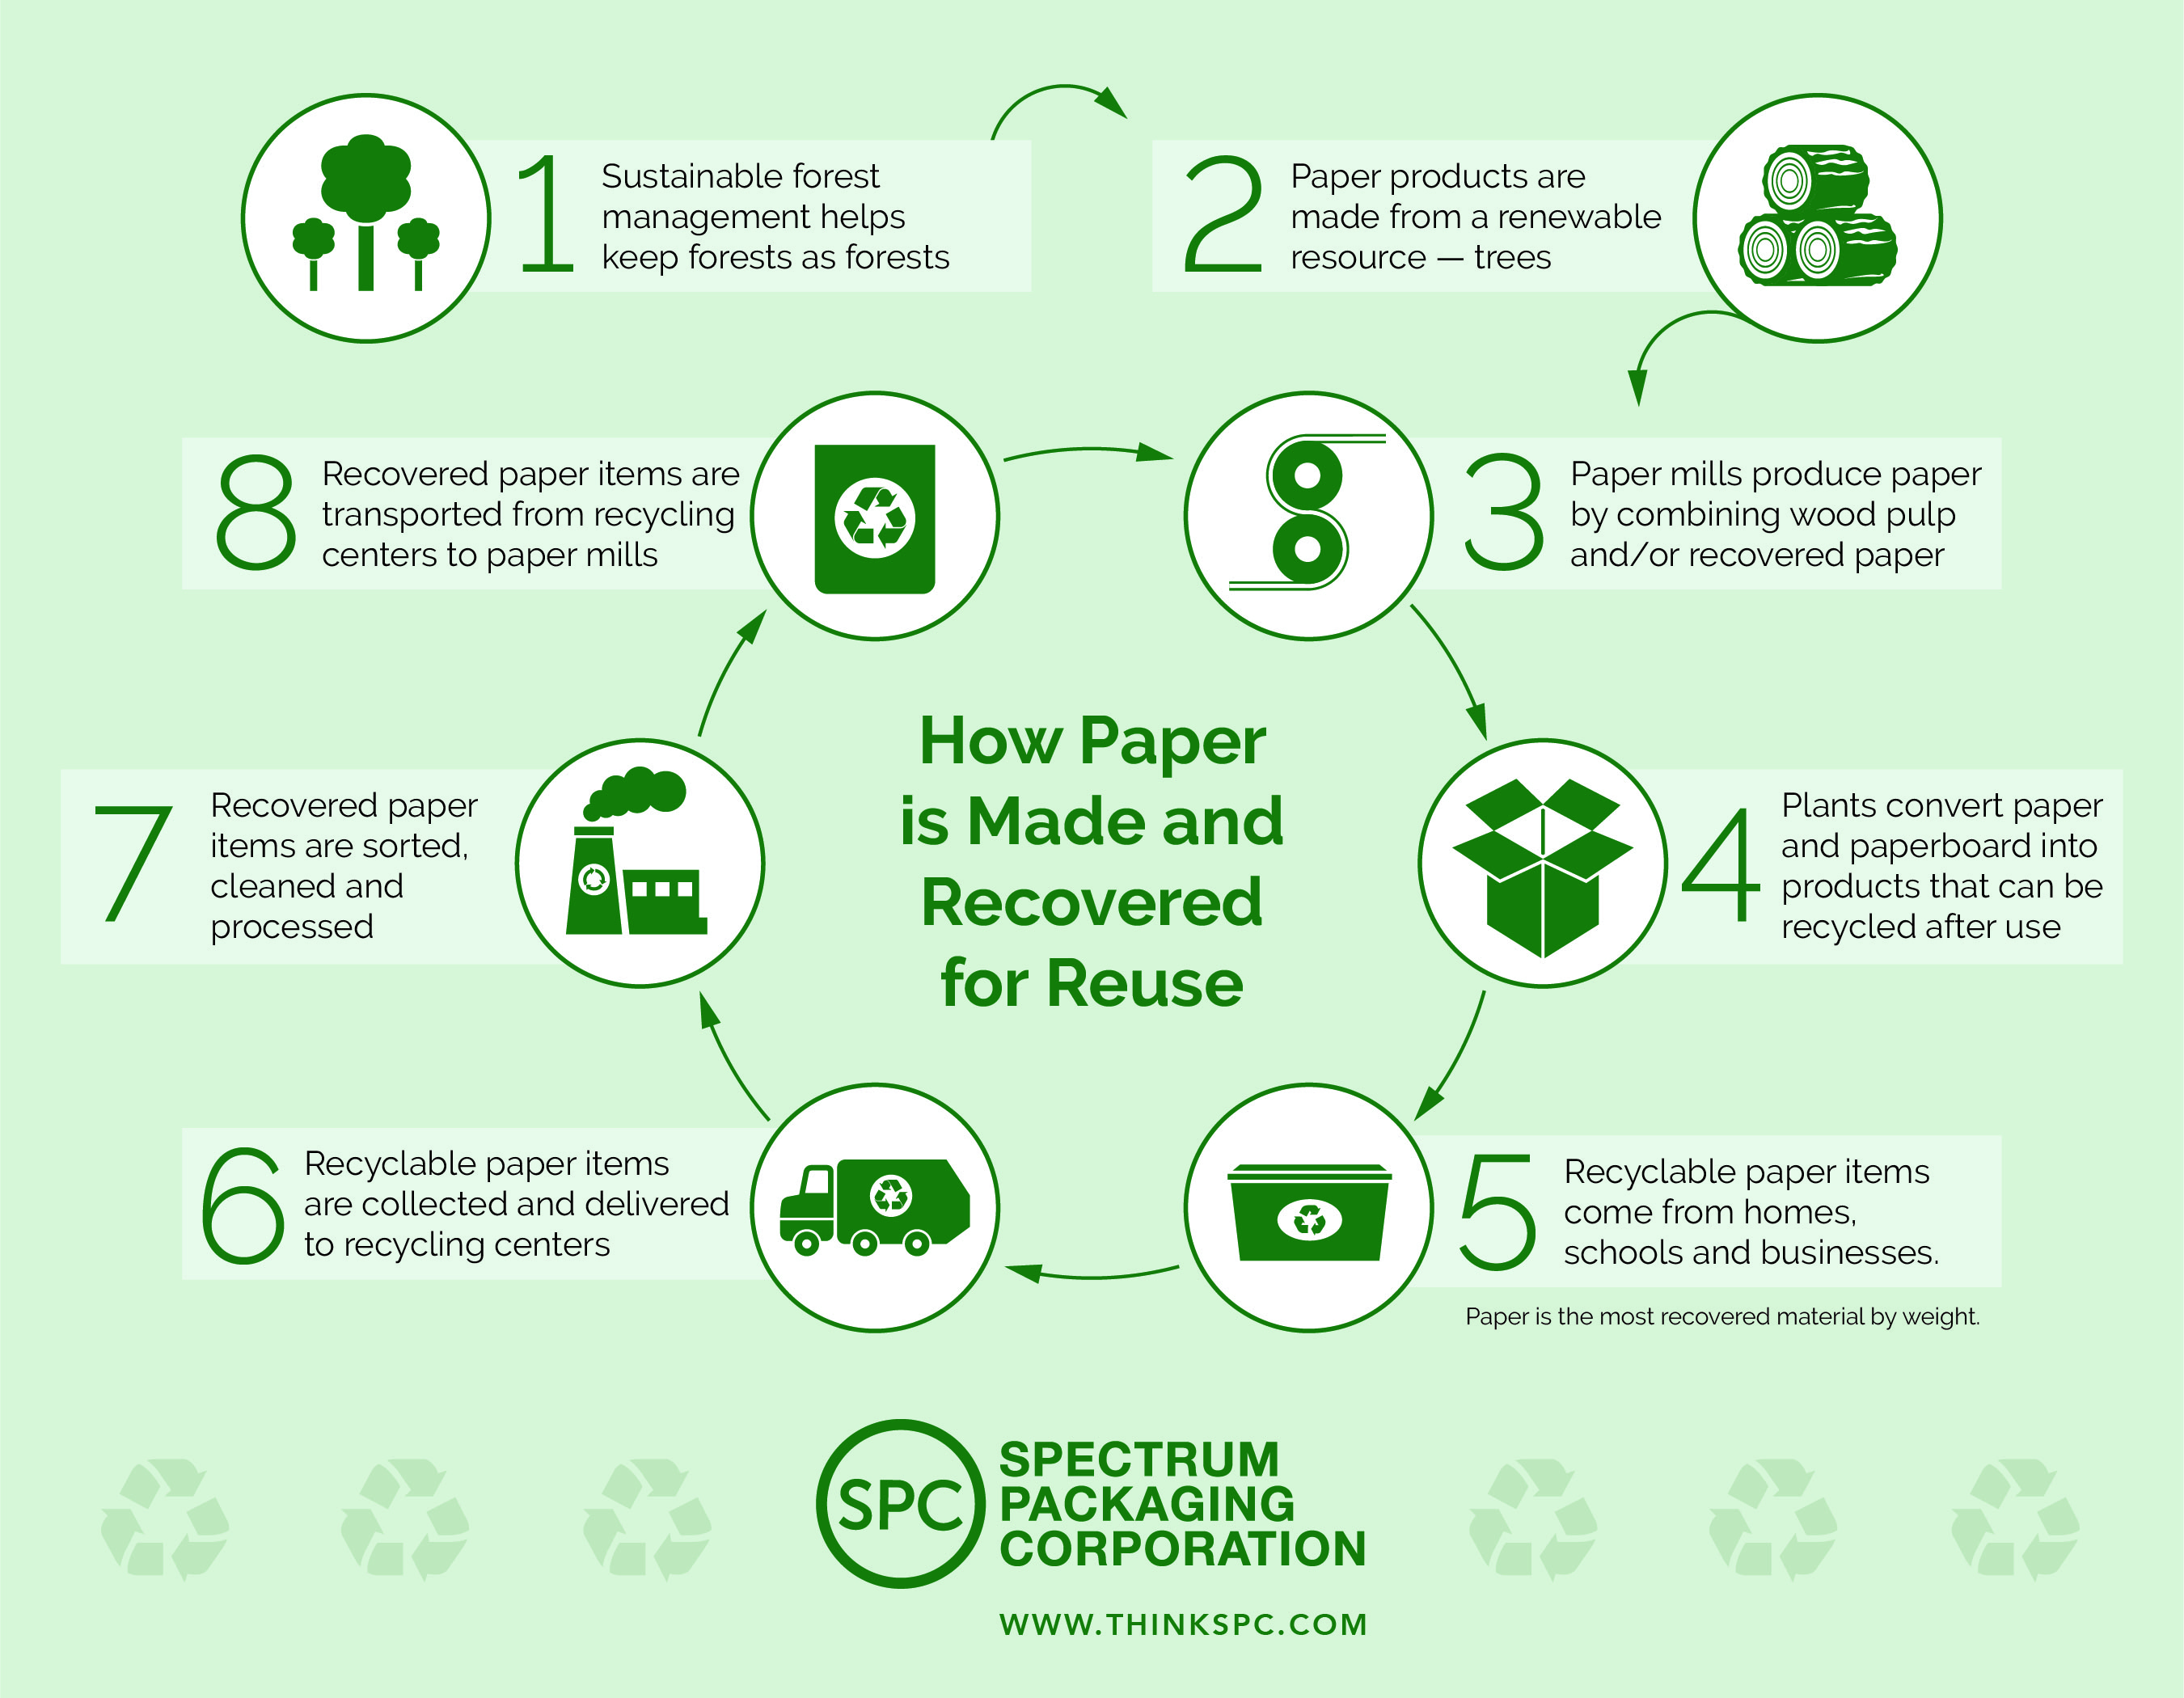 How Paper is Made and Recovered for Reuse